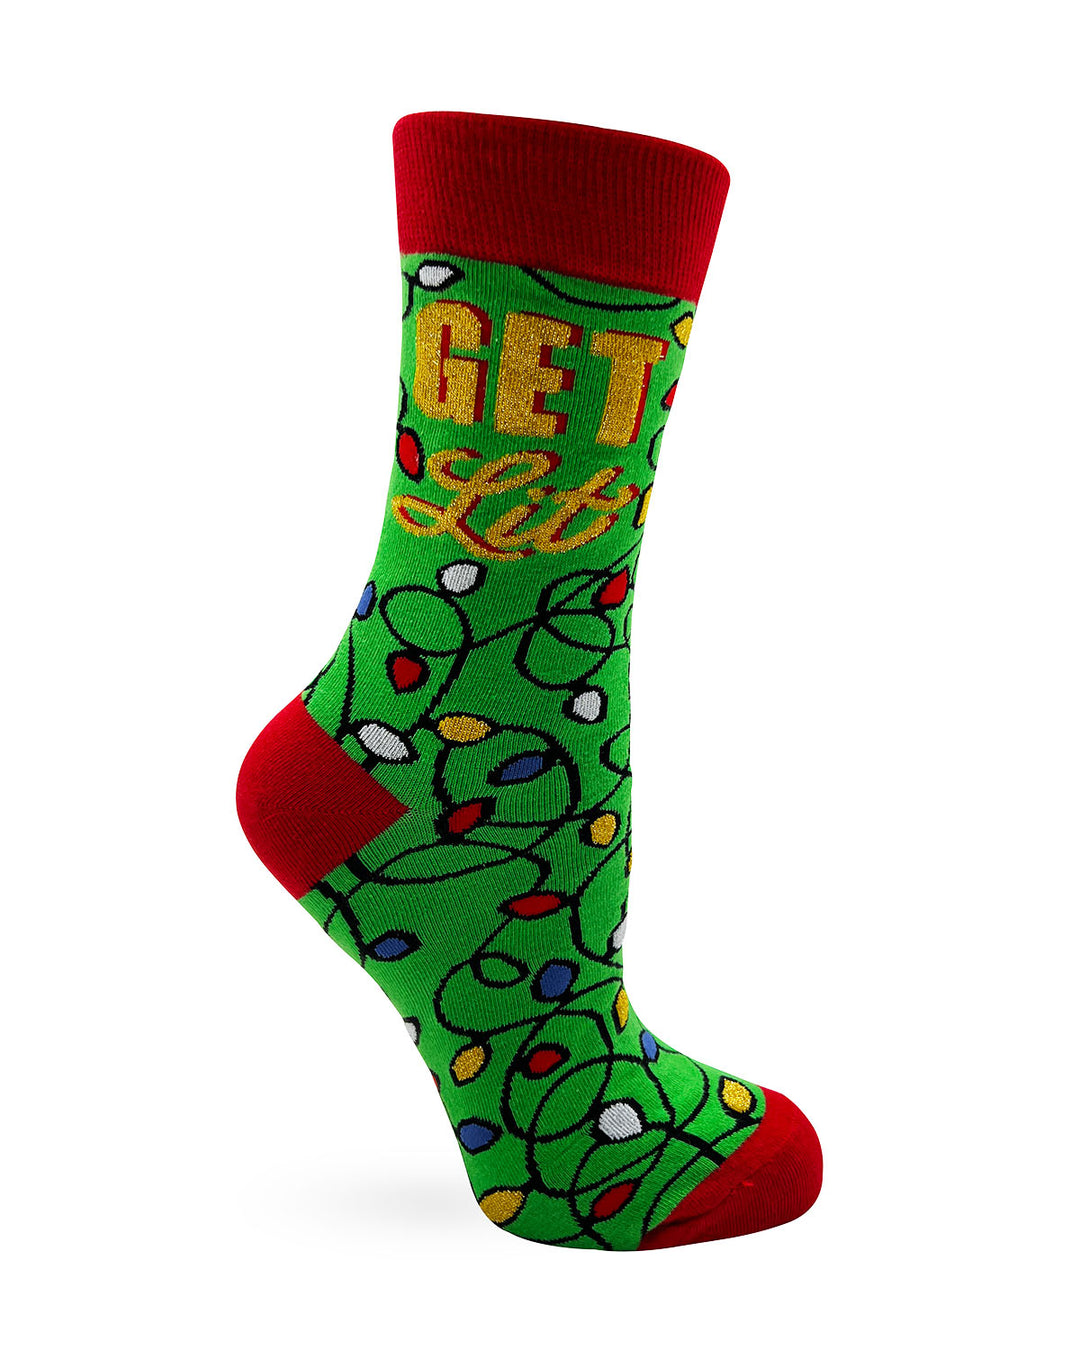 Green and red Women's Novelty Crew Socks with saying "Get Lit"